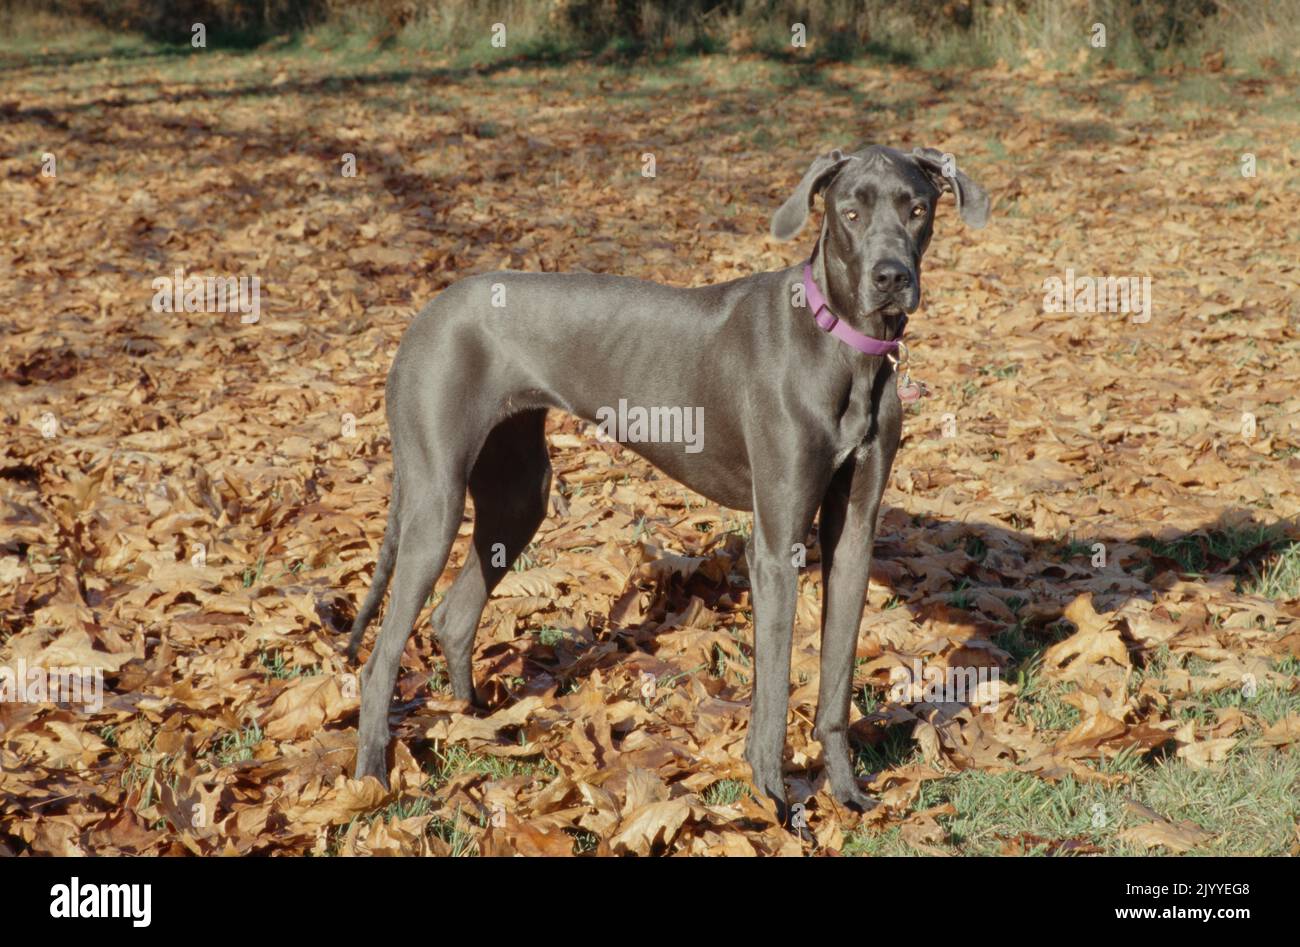 Great Dane in pink collar standing in leaves looking right casting shadow Stock Photo